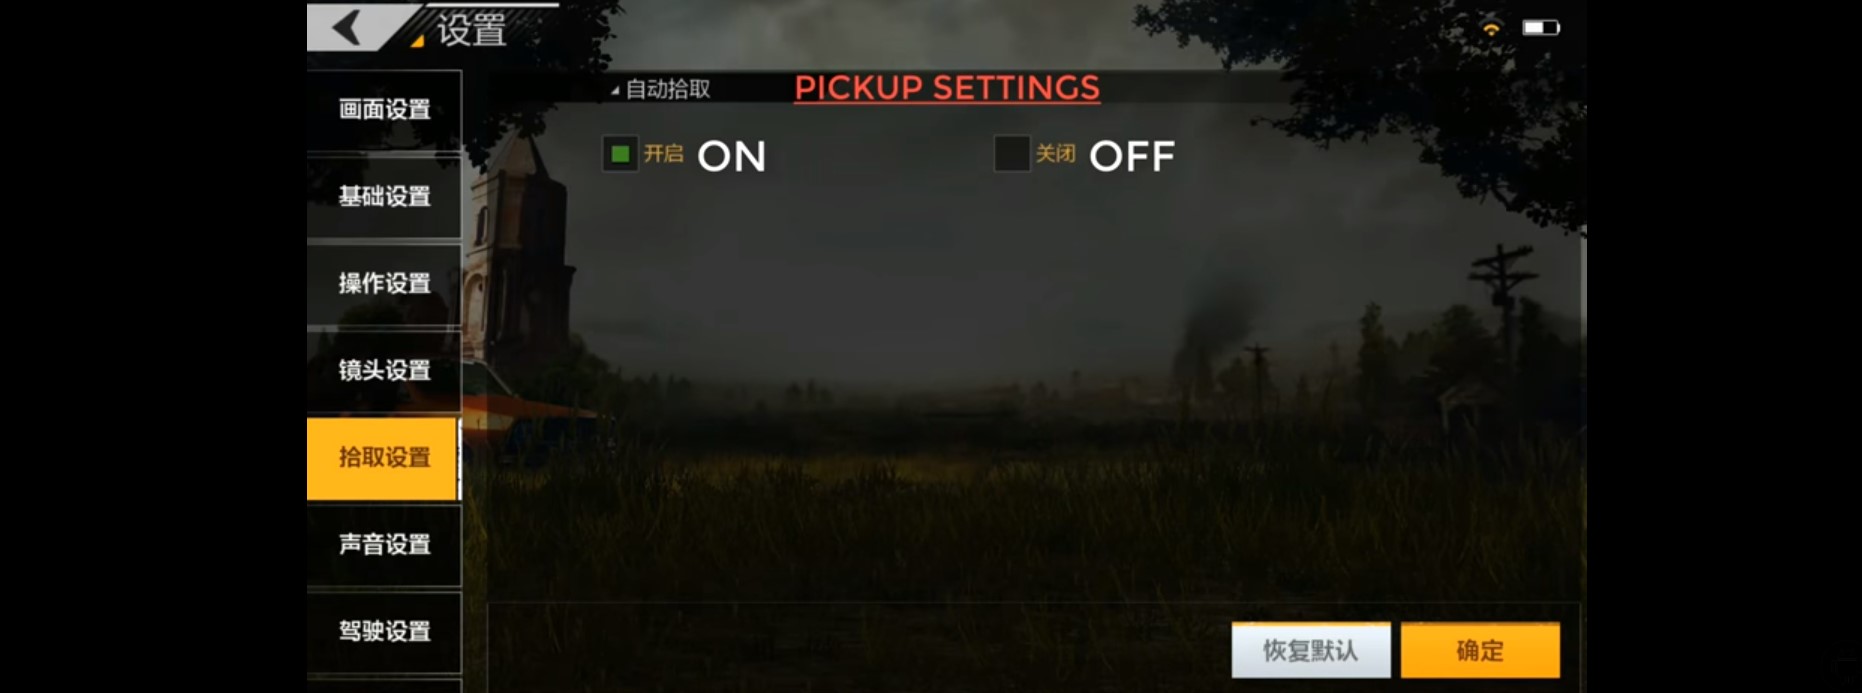 Pubg mobile room chat HOW DO